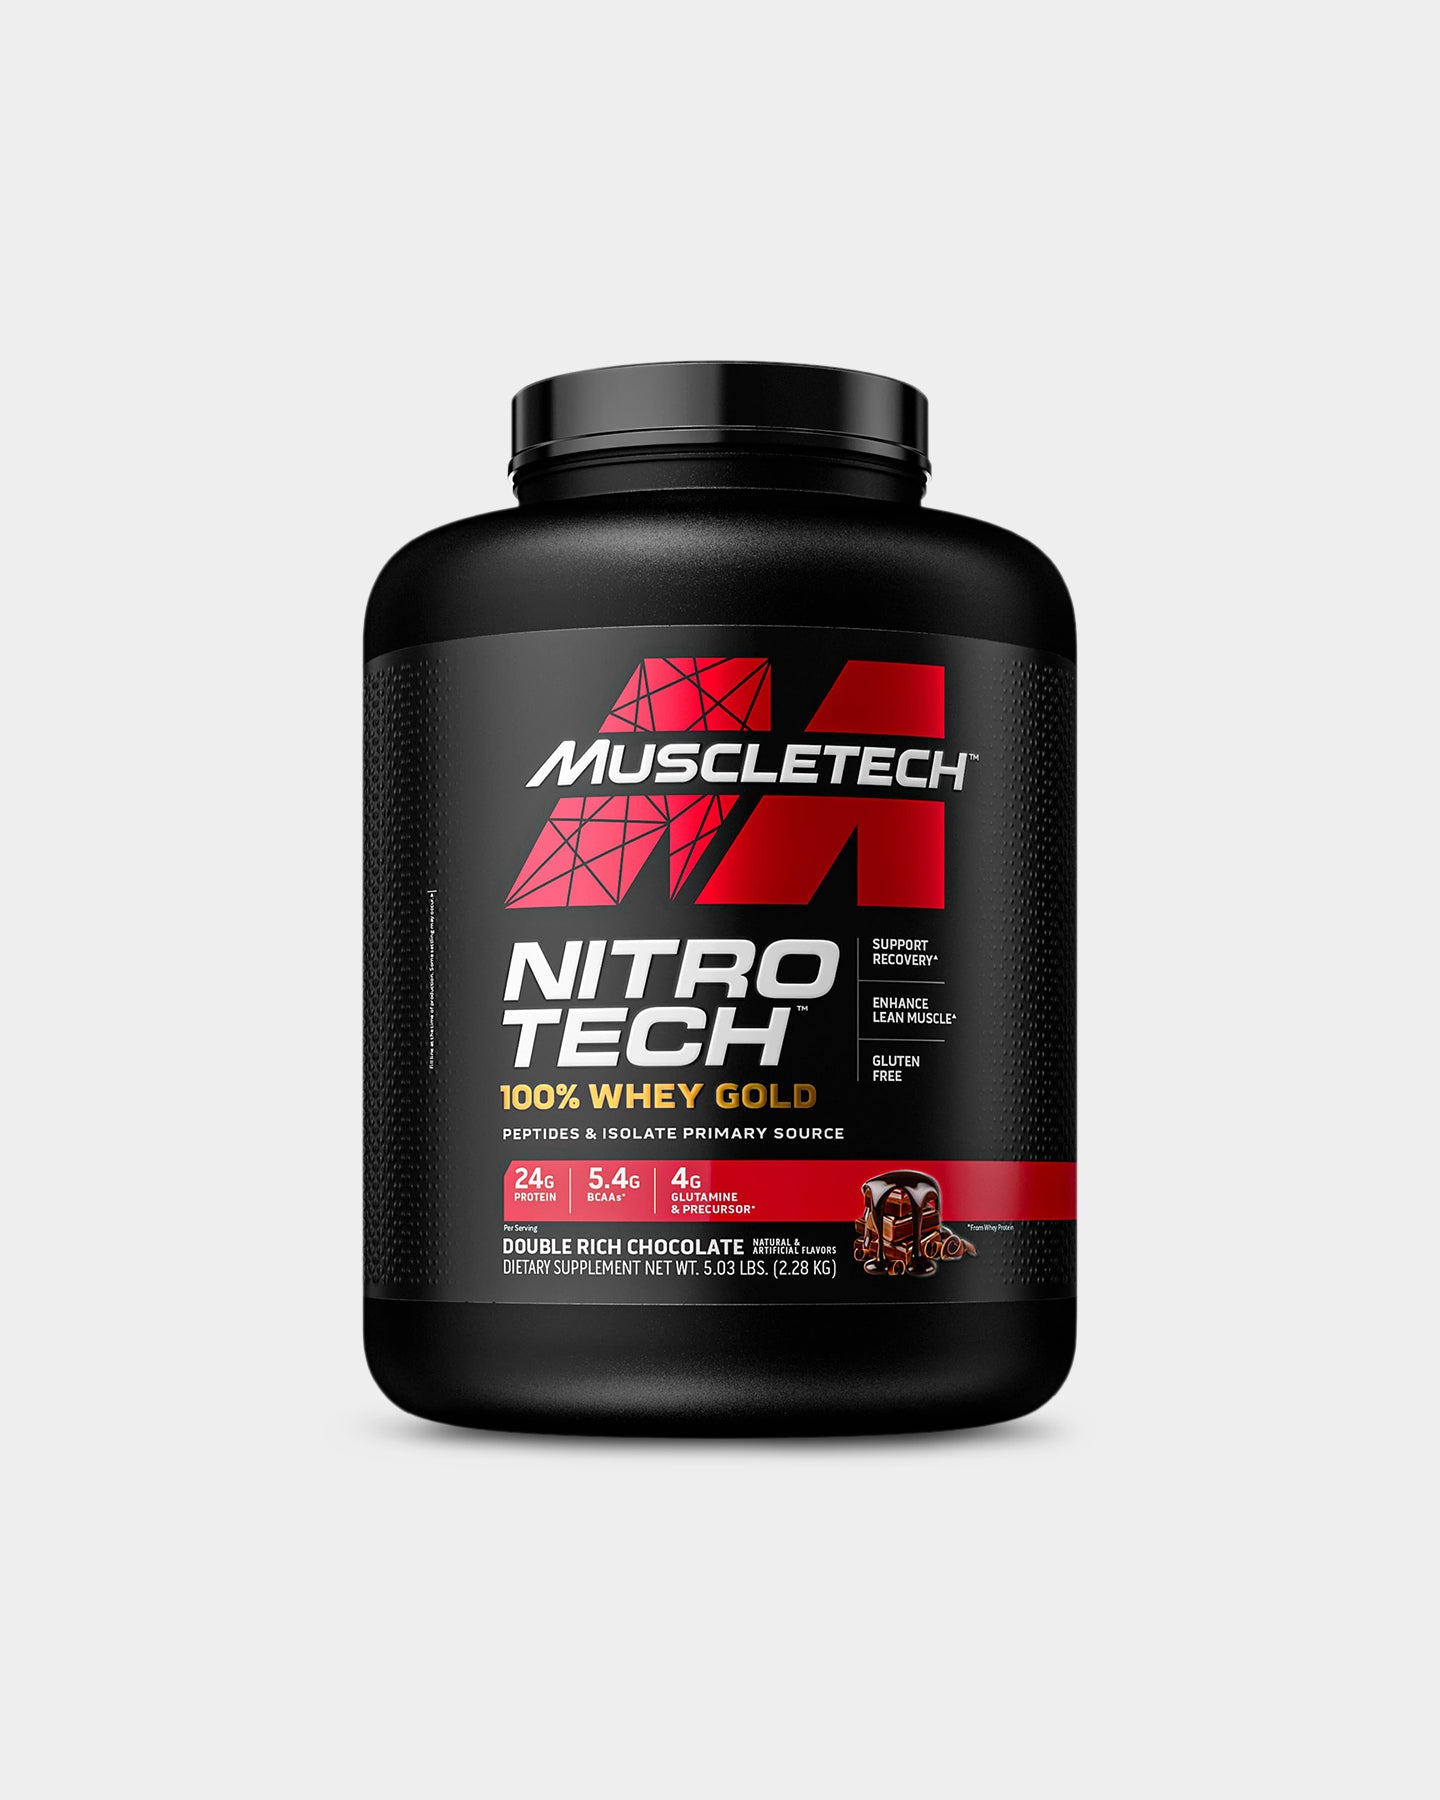 31 Servings DOUBLE RICH CHOCOLATE Muscletech Nitro Tech WHEY GOLD Protein 2 lb 